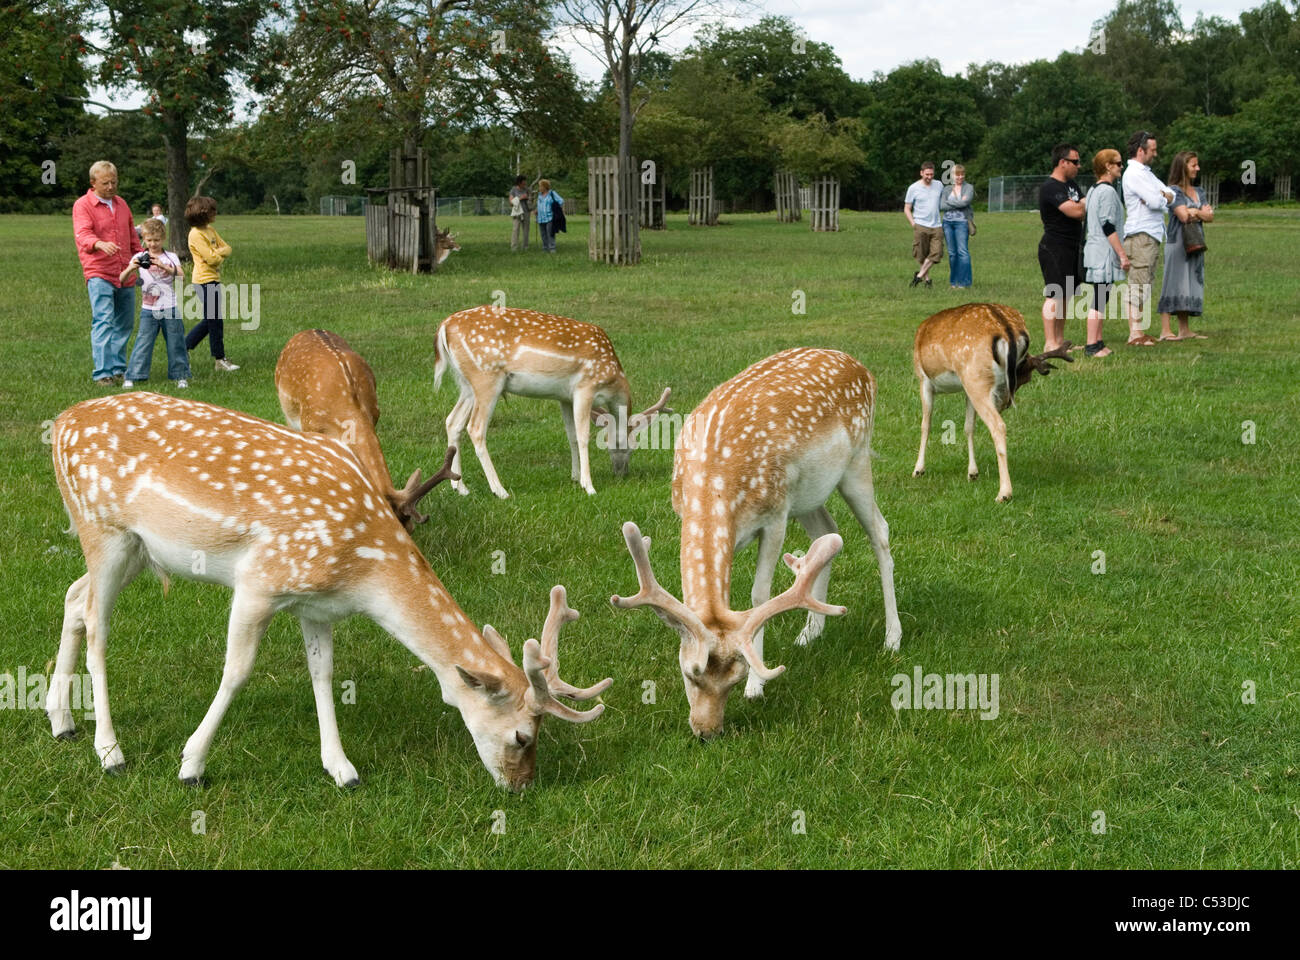 Richmond Park Surrey. Young deer feeding with Londoners tourists watching. Deer still so young as not to worry about humans. Stock Photo